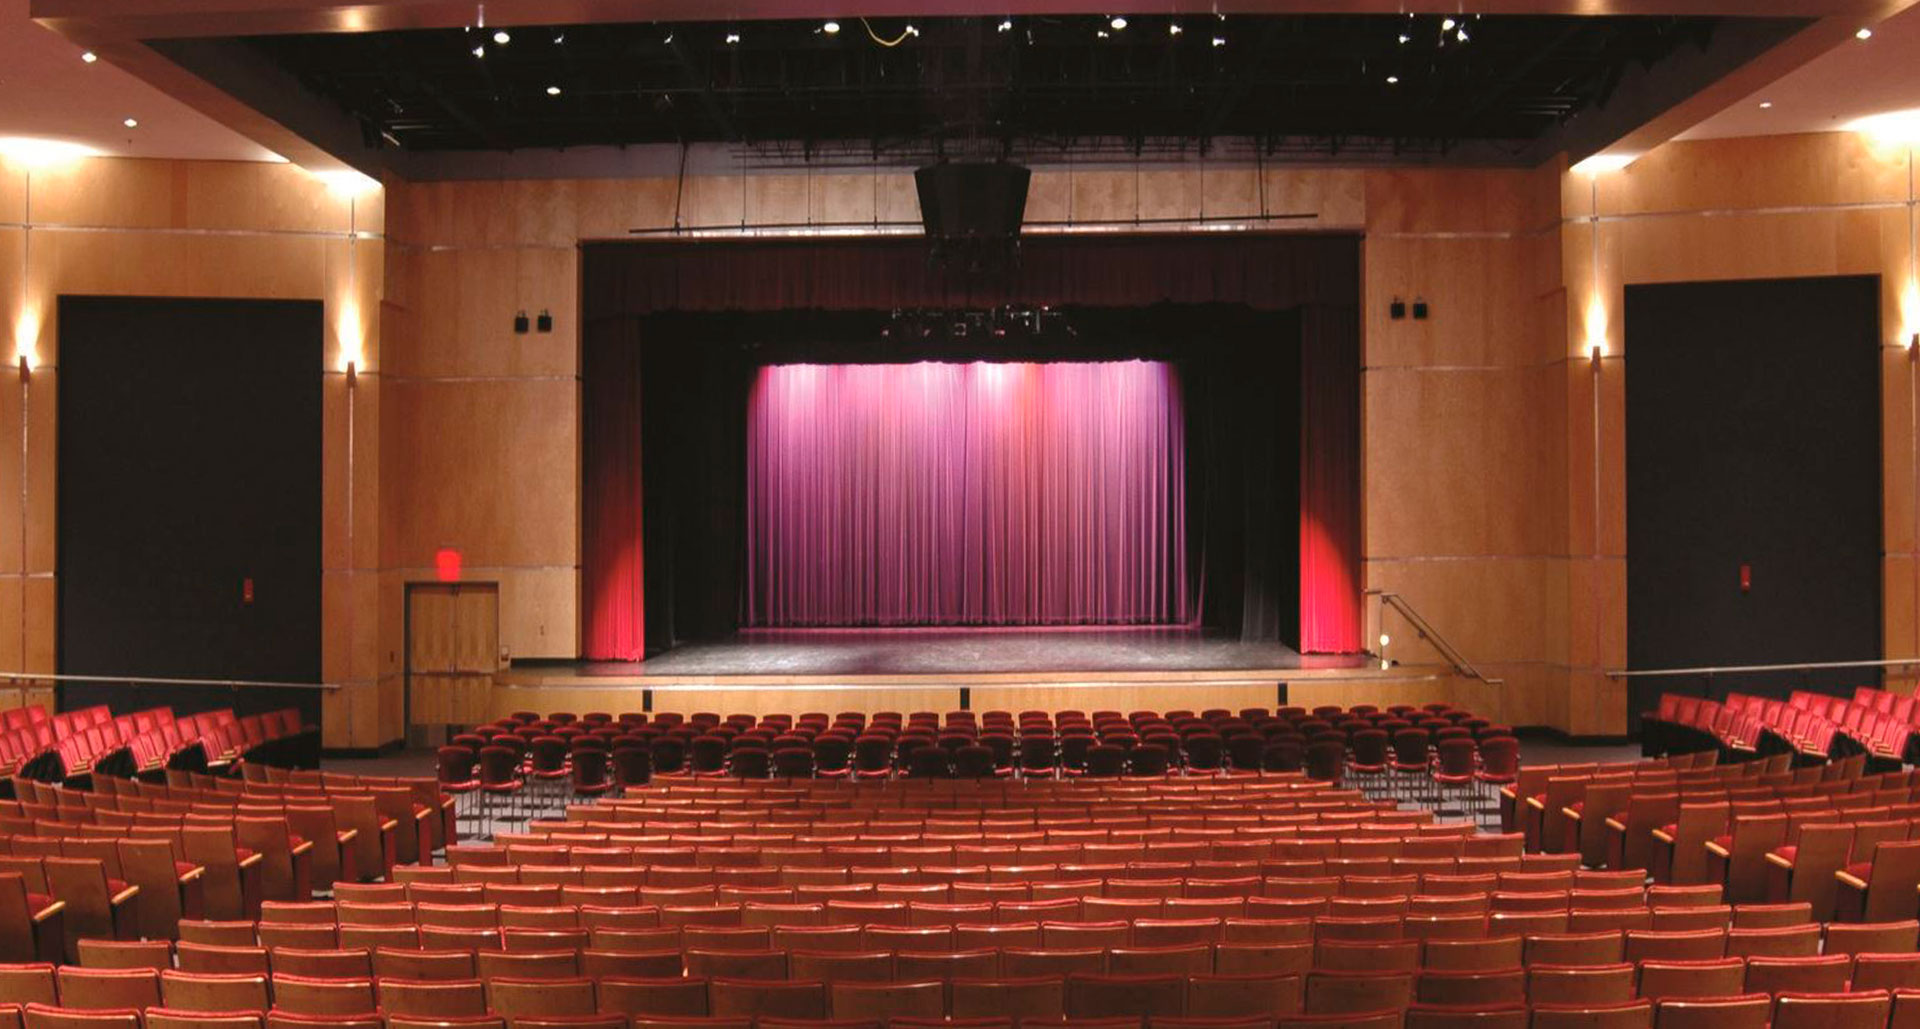 Know All About Ticket Information of The Kiva Auditorium in Albuquerque